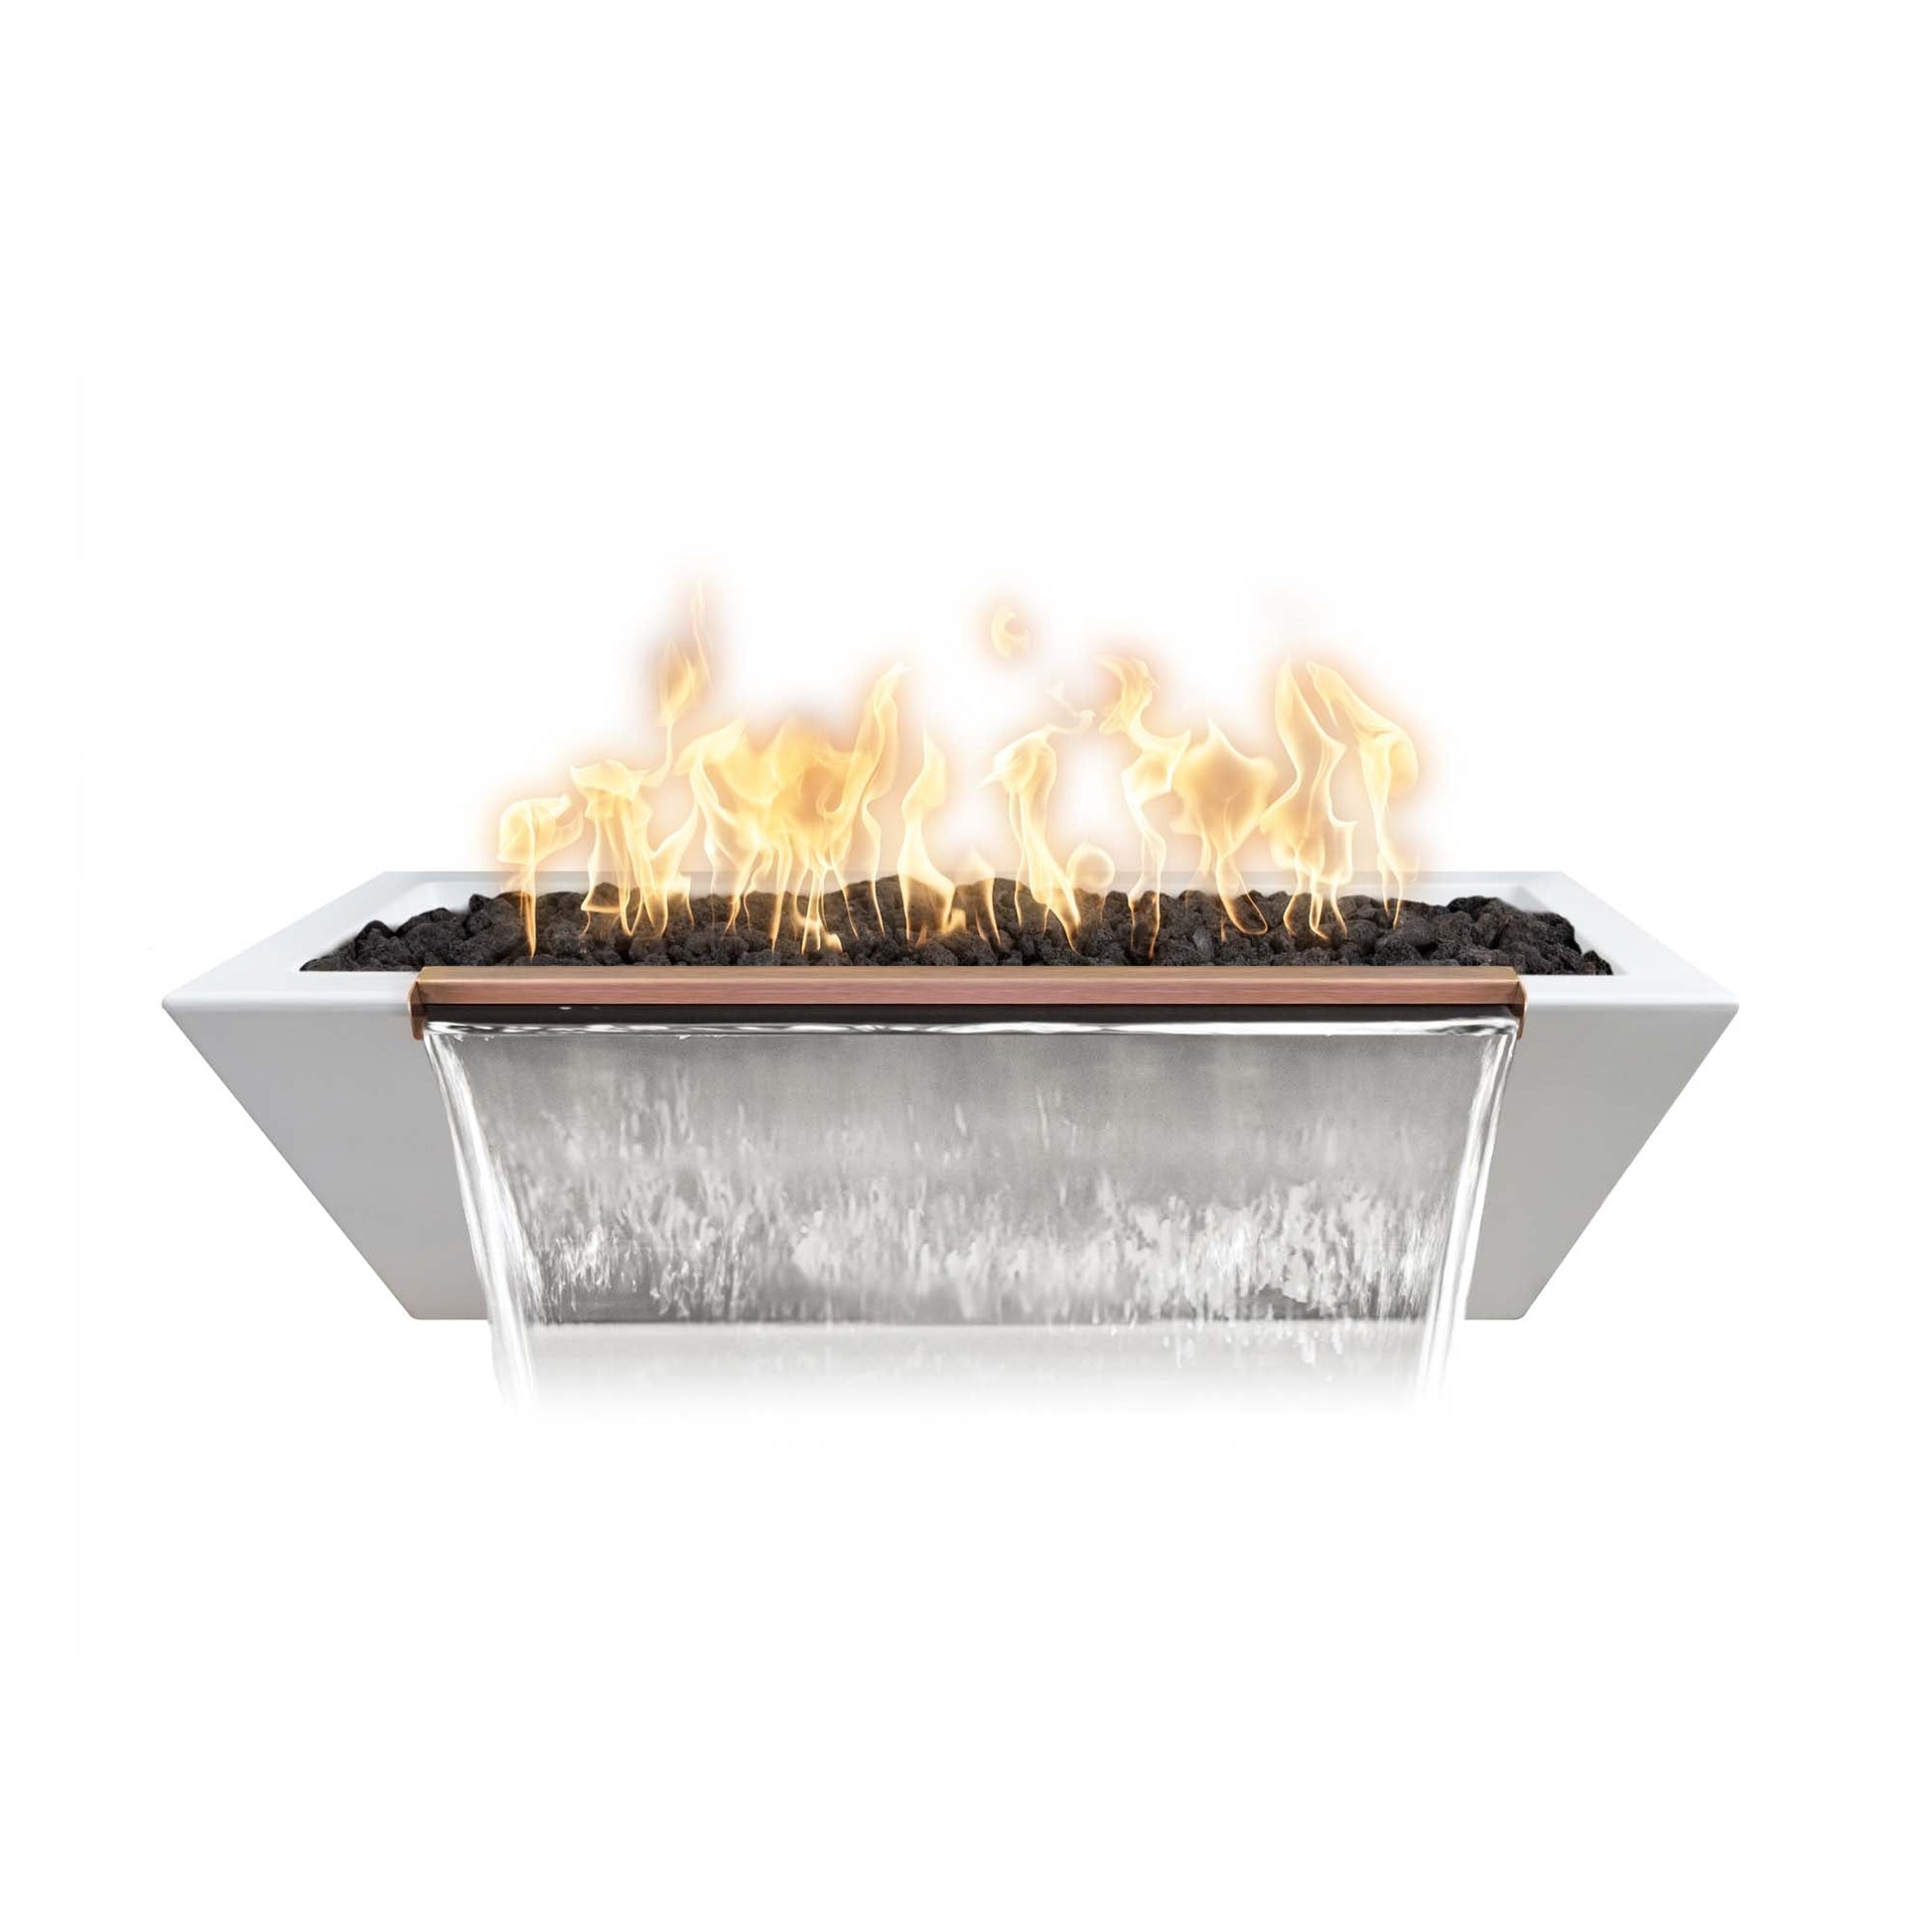 The Outdoor Plus Linear Maya 72" Brown GFRC Concrete Natural Gas Fire & Water Bowl with Match Lit Ignition